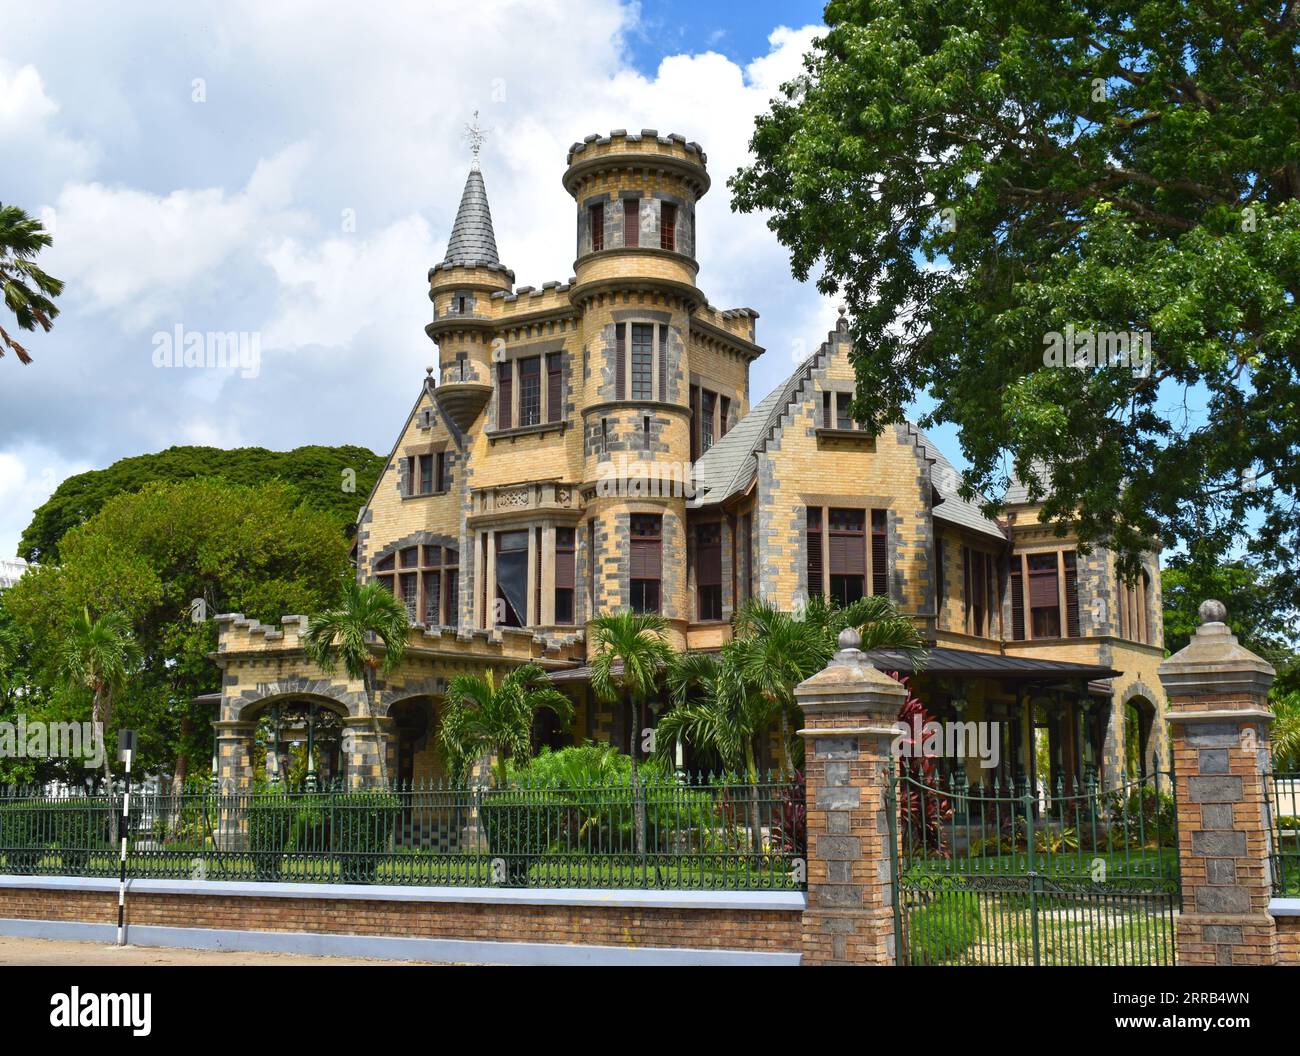 The Stollmeyer’s Castle or Killarney in Port of Spain, Trinidad and Tobago. It is one of the magnificent seven buildings. Stock Photo